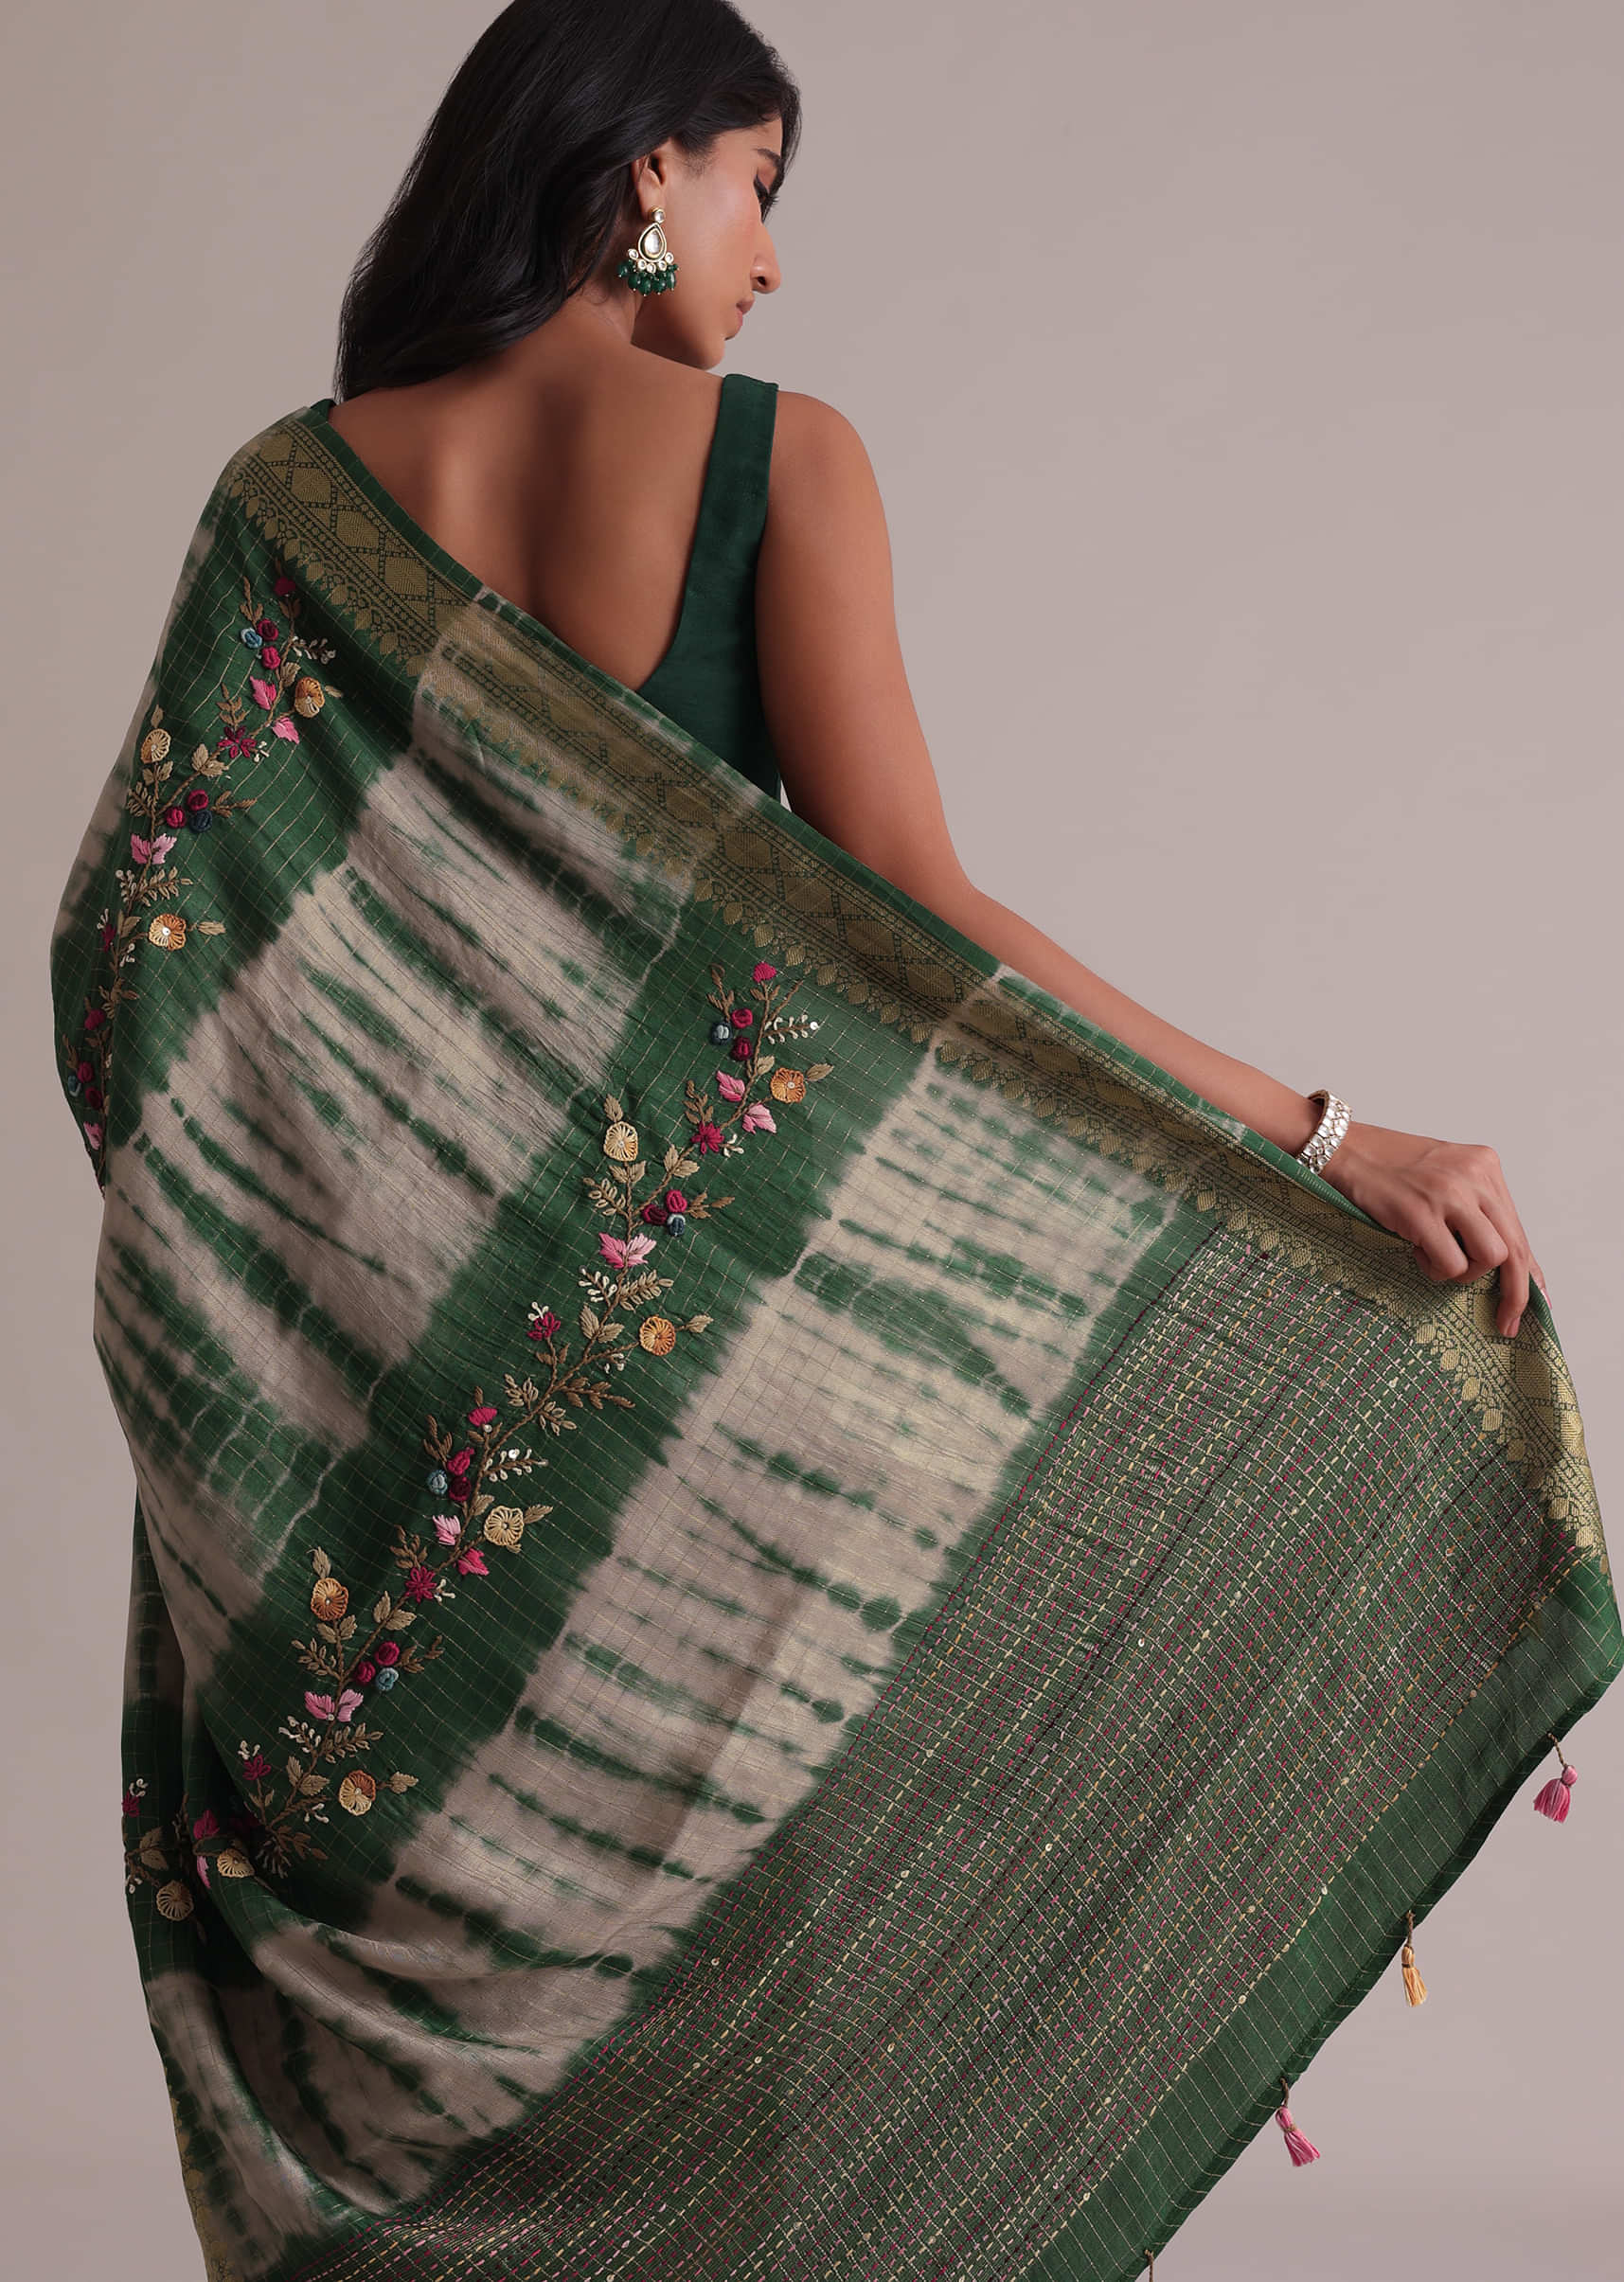 Dual-Tone Beige And Green Ombre Shibori Saree With Resham 3D Bud Embroidery In Dola Crepe